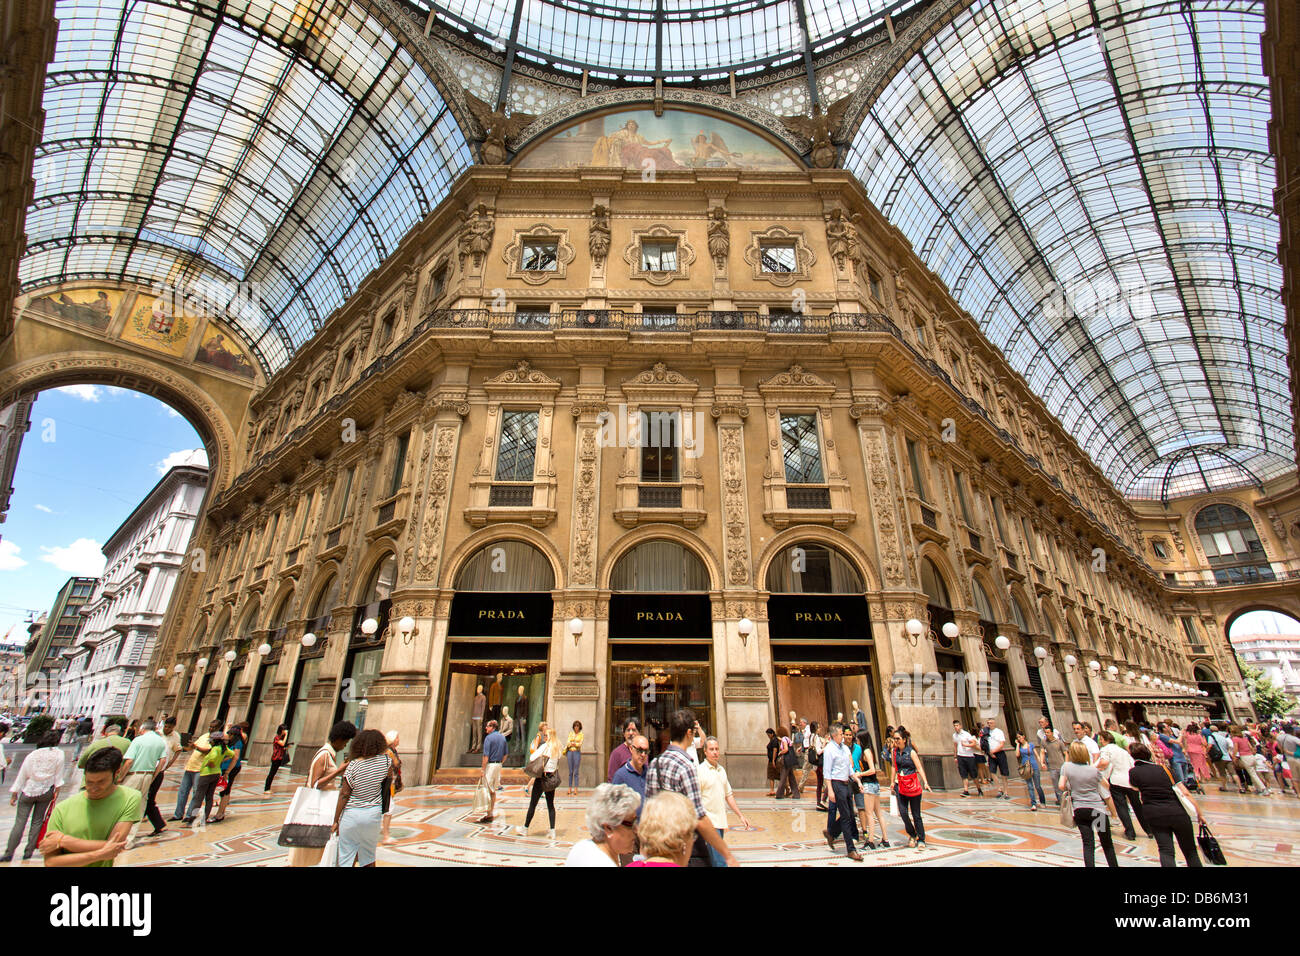 Best Shopping Outlets In Milan Italy - Best Design Idea